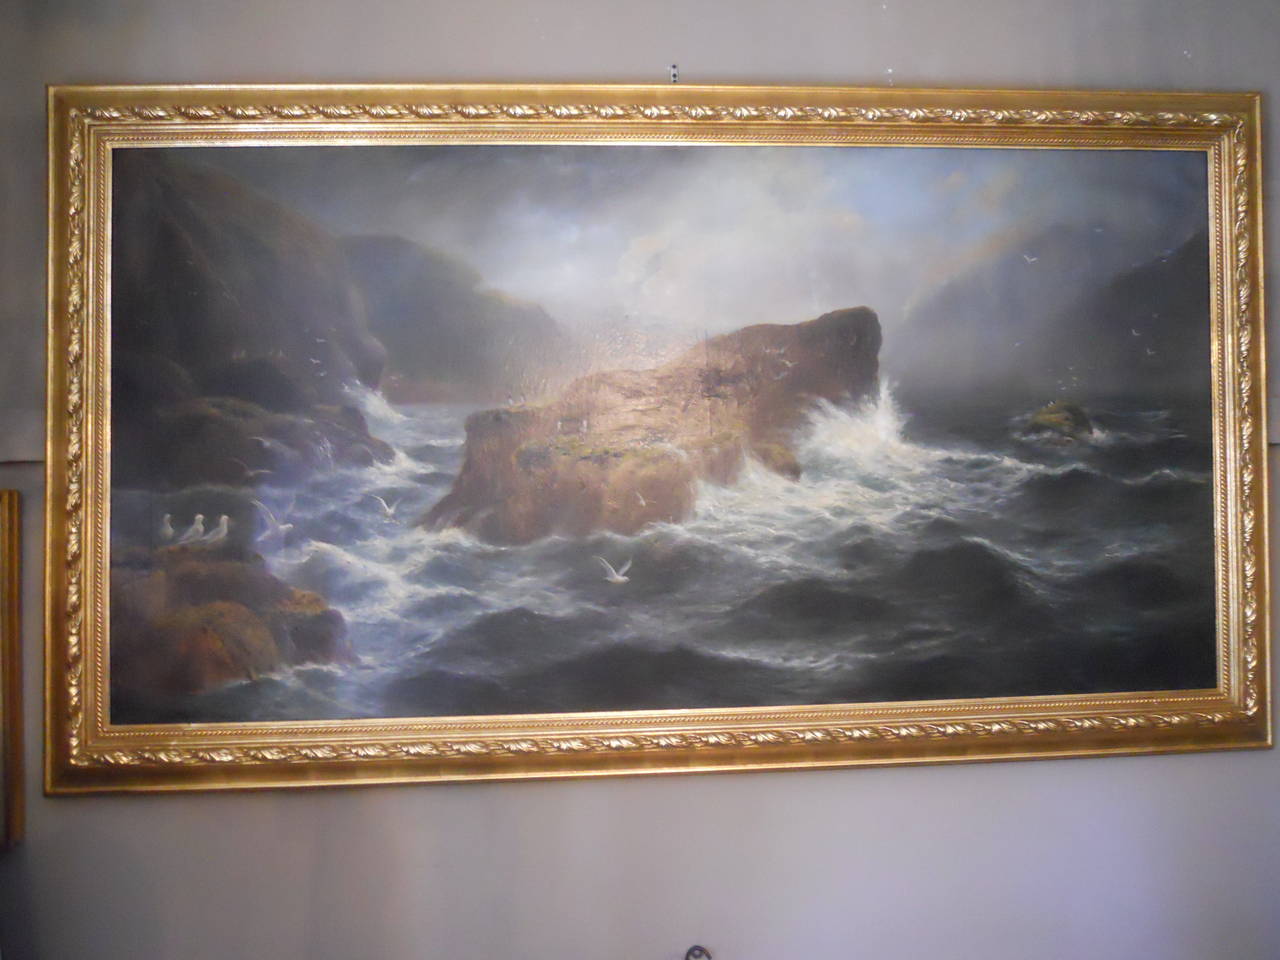 Astonishing Daniel Sherrin 19th century oil on canvas painting of a seascape.

Measuring with the frame 48